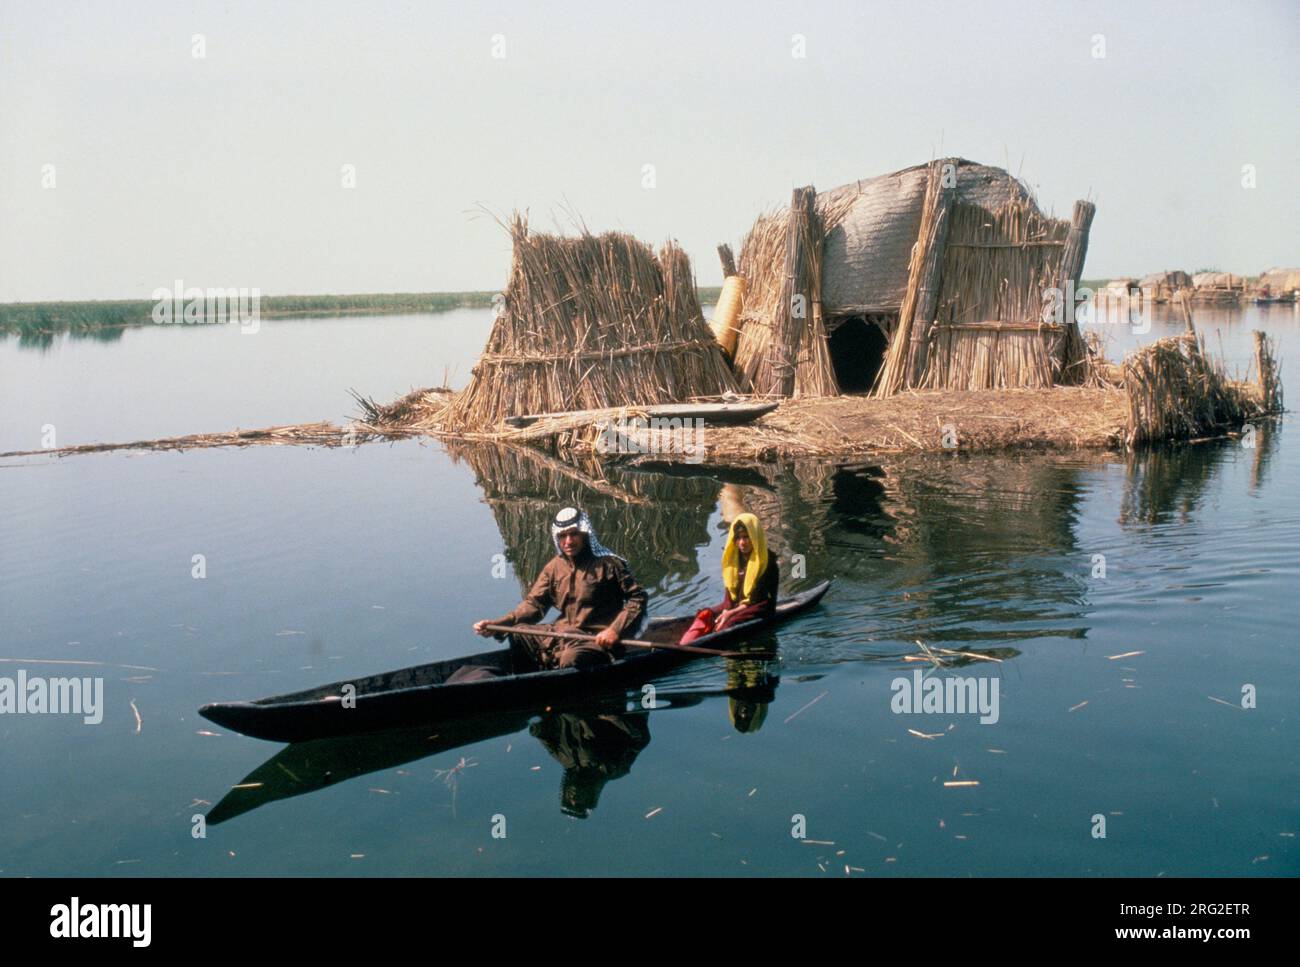 Marsh Arabs Southern Iraq. Marsh Arab man with daughter in boats with traditional reed built island home called a kibasha. Rivers Tigris and Euphrates wetlands, Hammar marshes. Southern Iraq 1980s HOMER SYKES Stock Photo